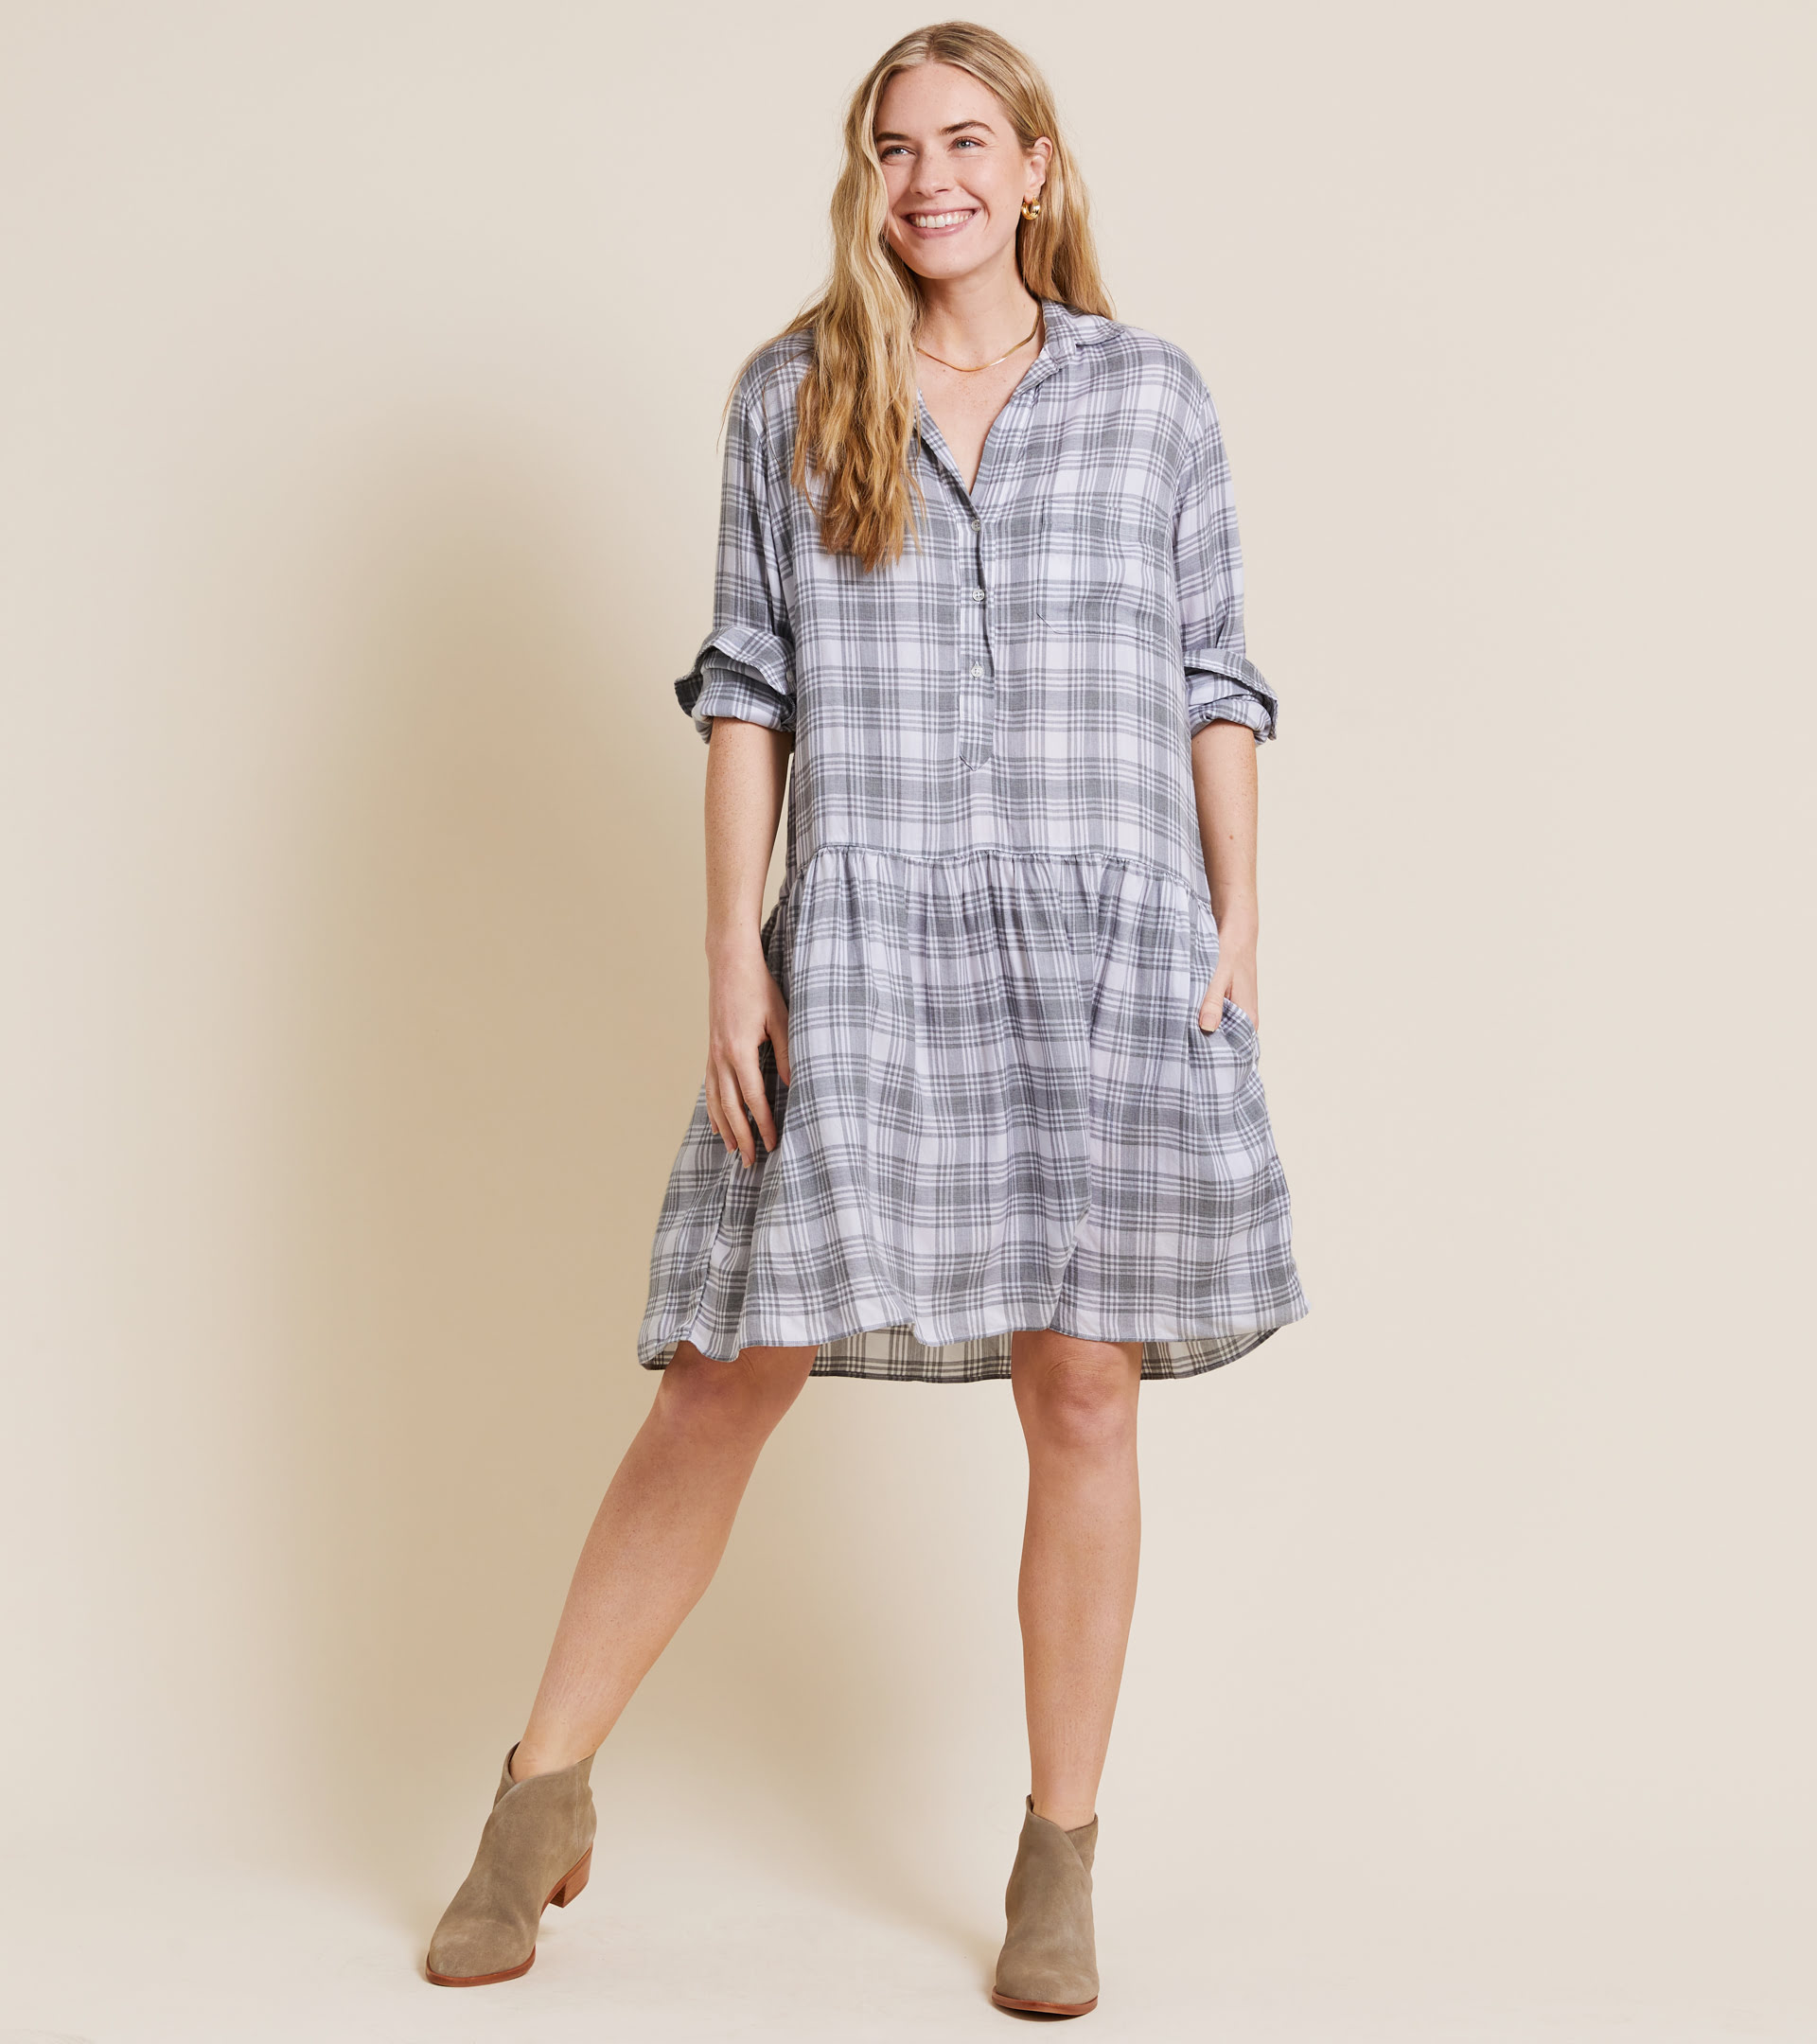 The Changemaker Dress Gray and White Plaid, Liquid Lyocell view 1